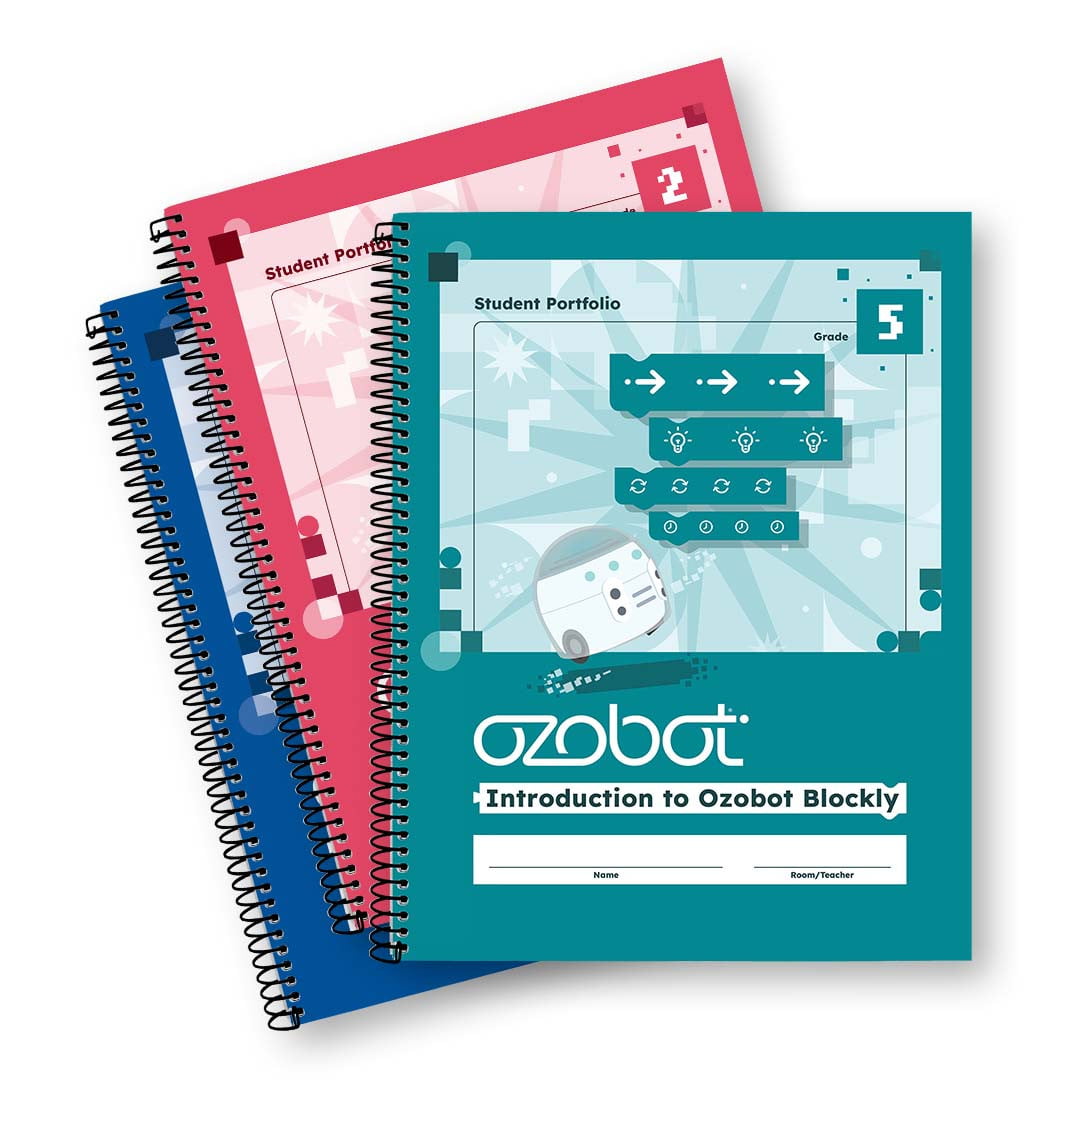 Introduction to Ozobot Blockly Curriculum - Second Grade - Ozobot - STEMfinity